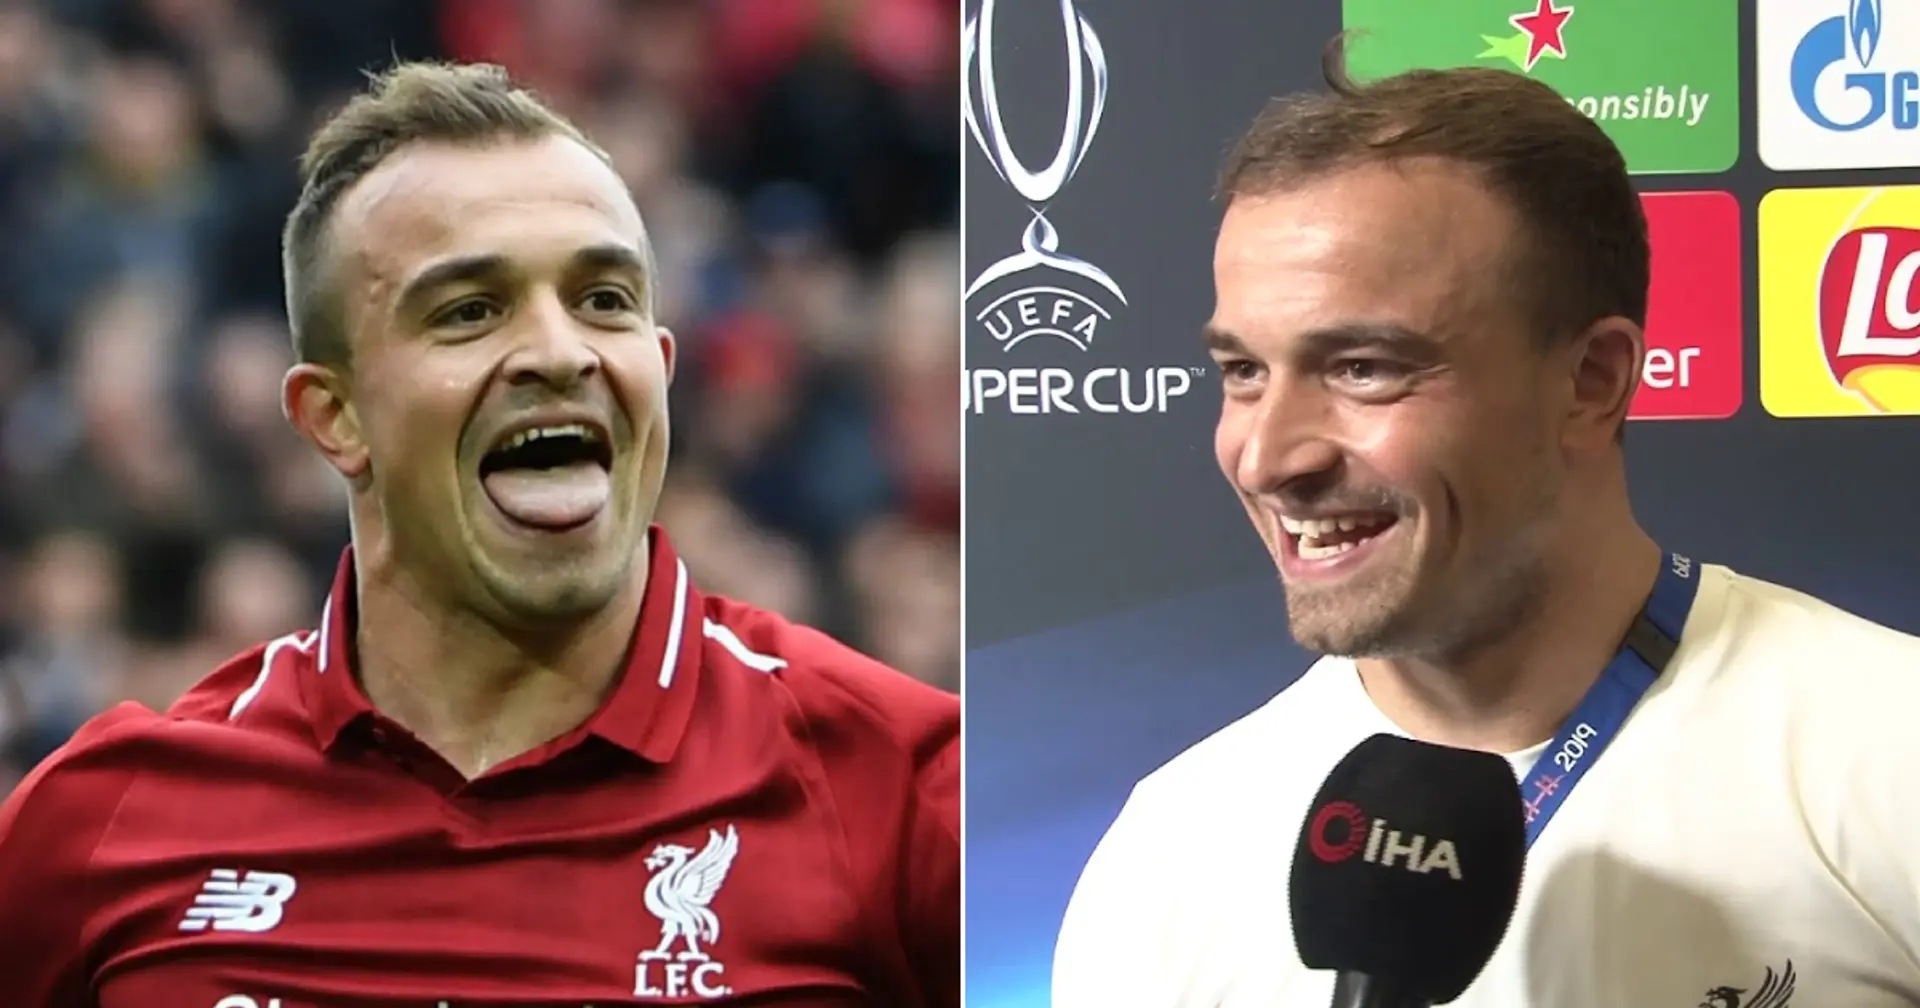 'They will always stay in my heart': Xherdan Shaqiri claims he remains Liverpool fan